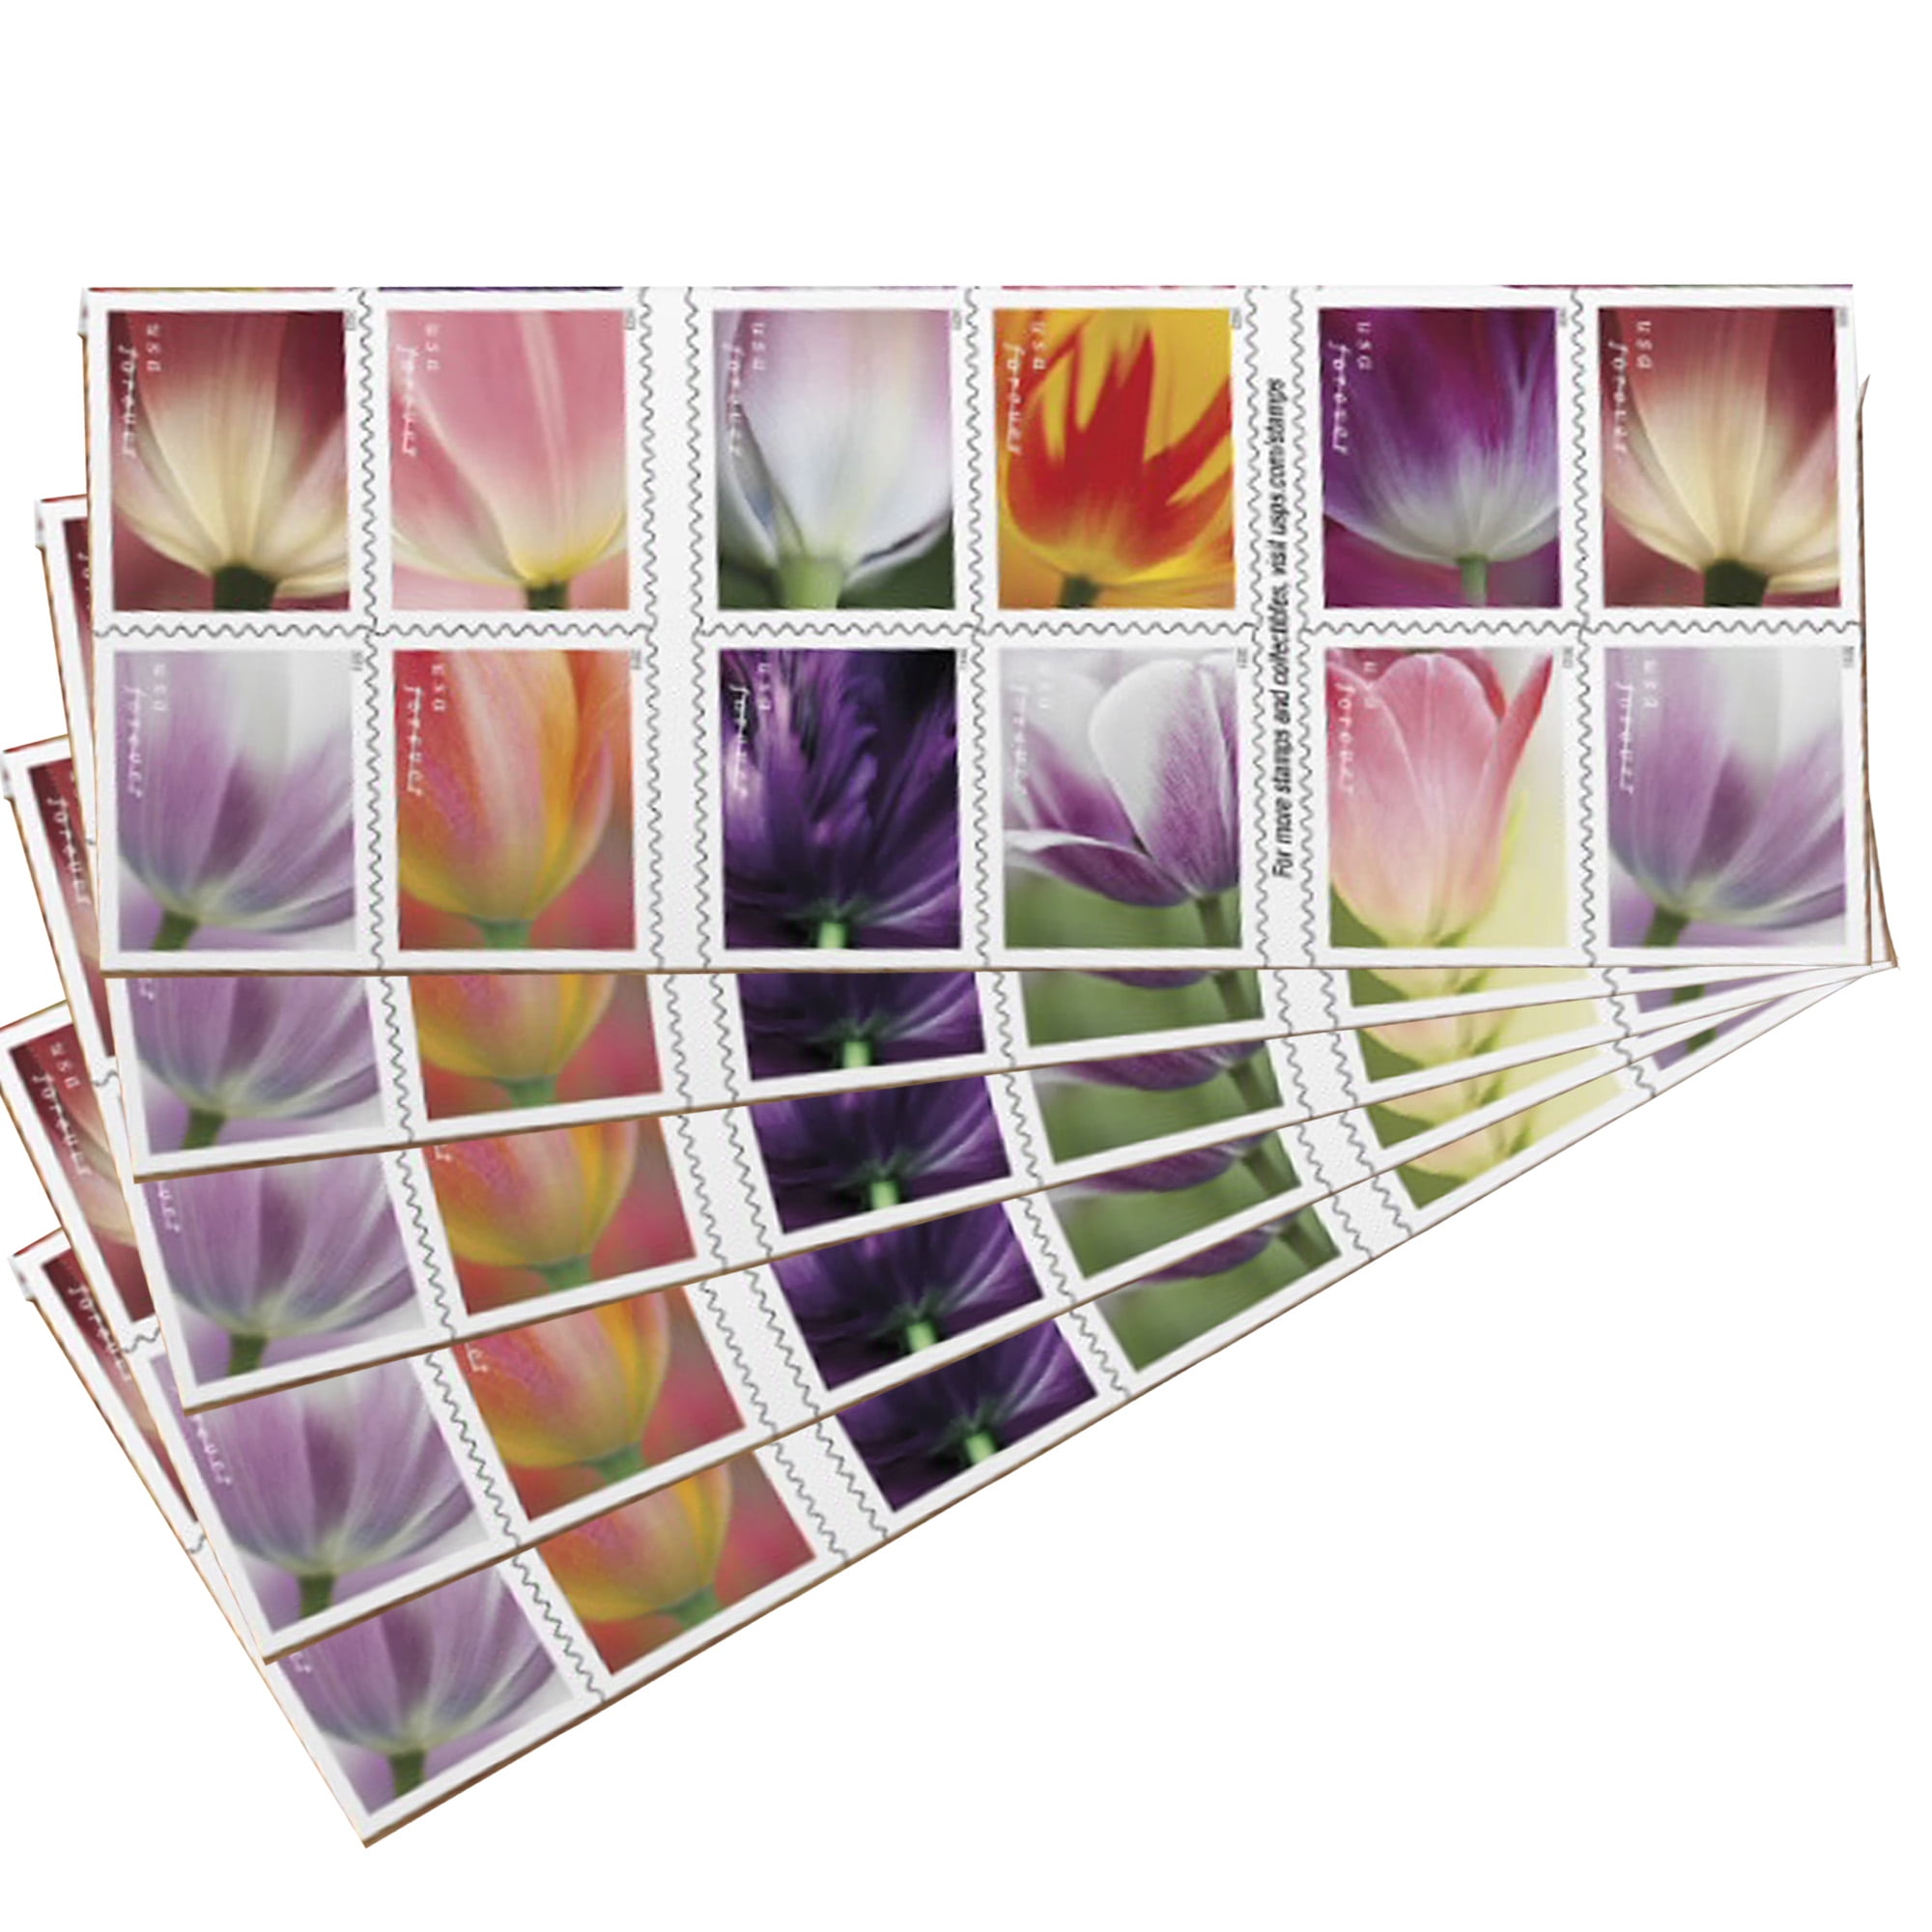 USPS Snowy Beauty (5 Booklets of 20) 100 Postage Forever Stamps,  Self-Adhesive, Garden, Wedding, Love, Celebration, Holiday, Winter, Flower,  2022